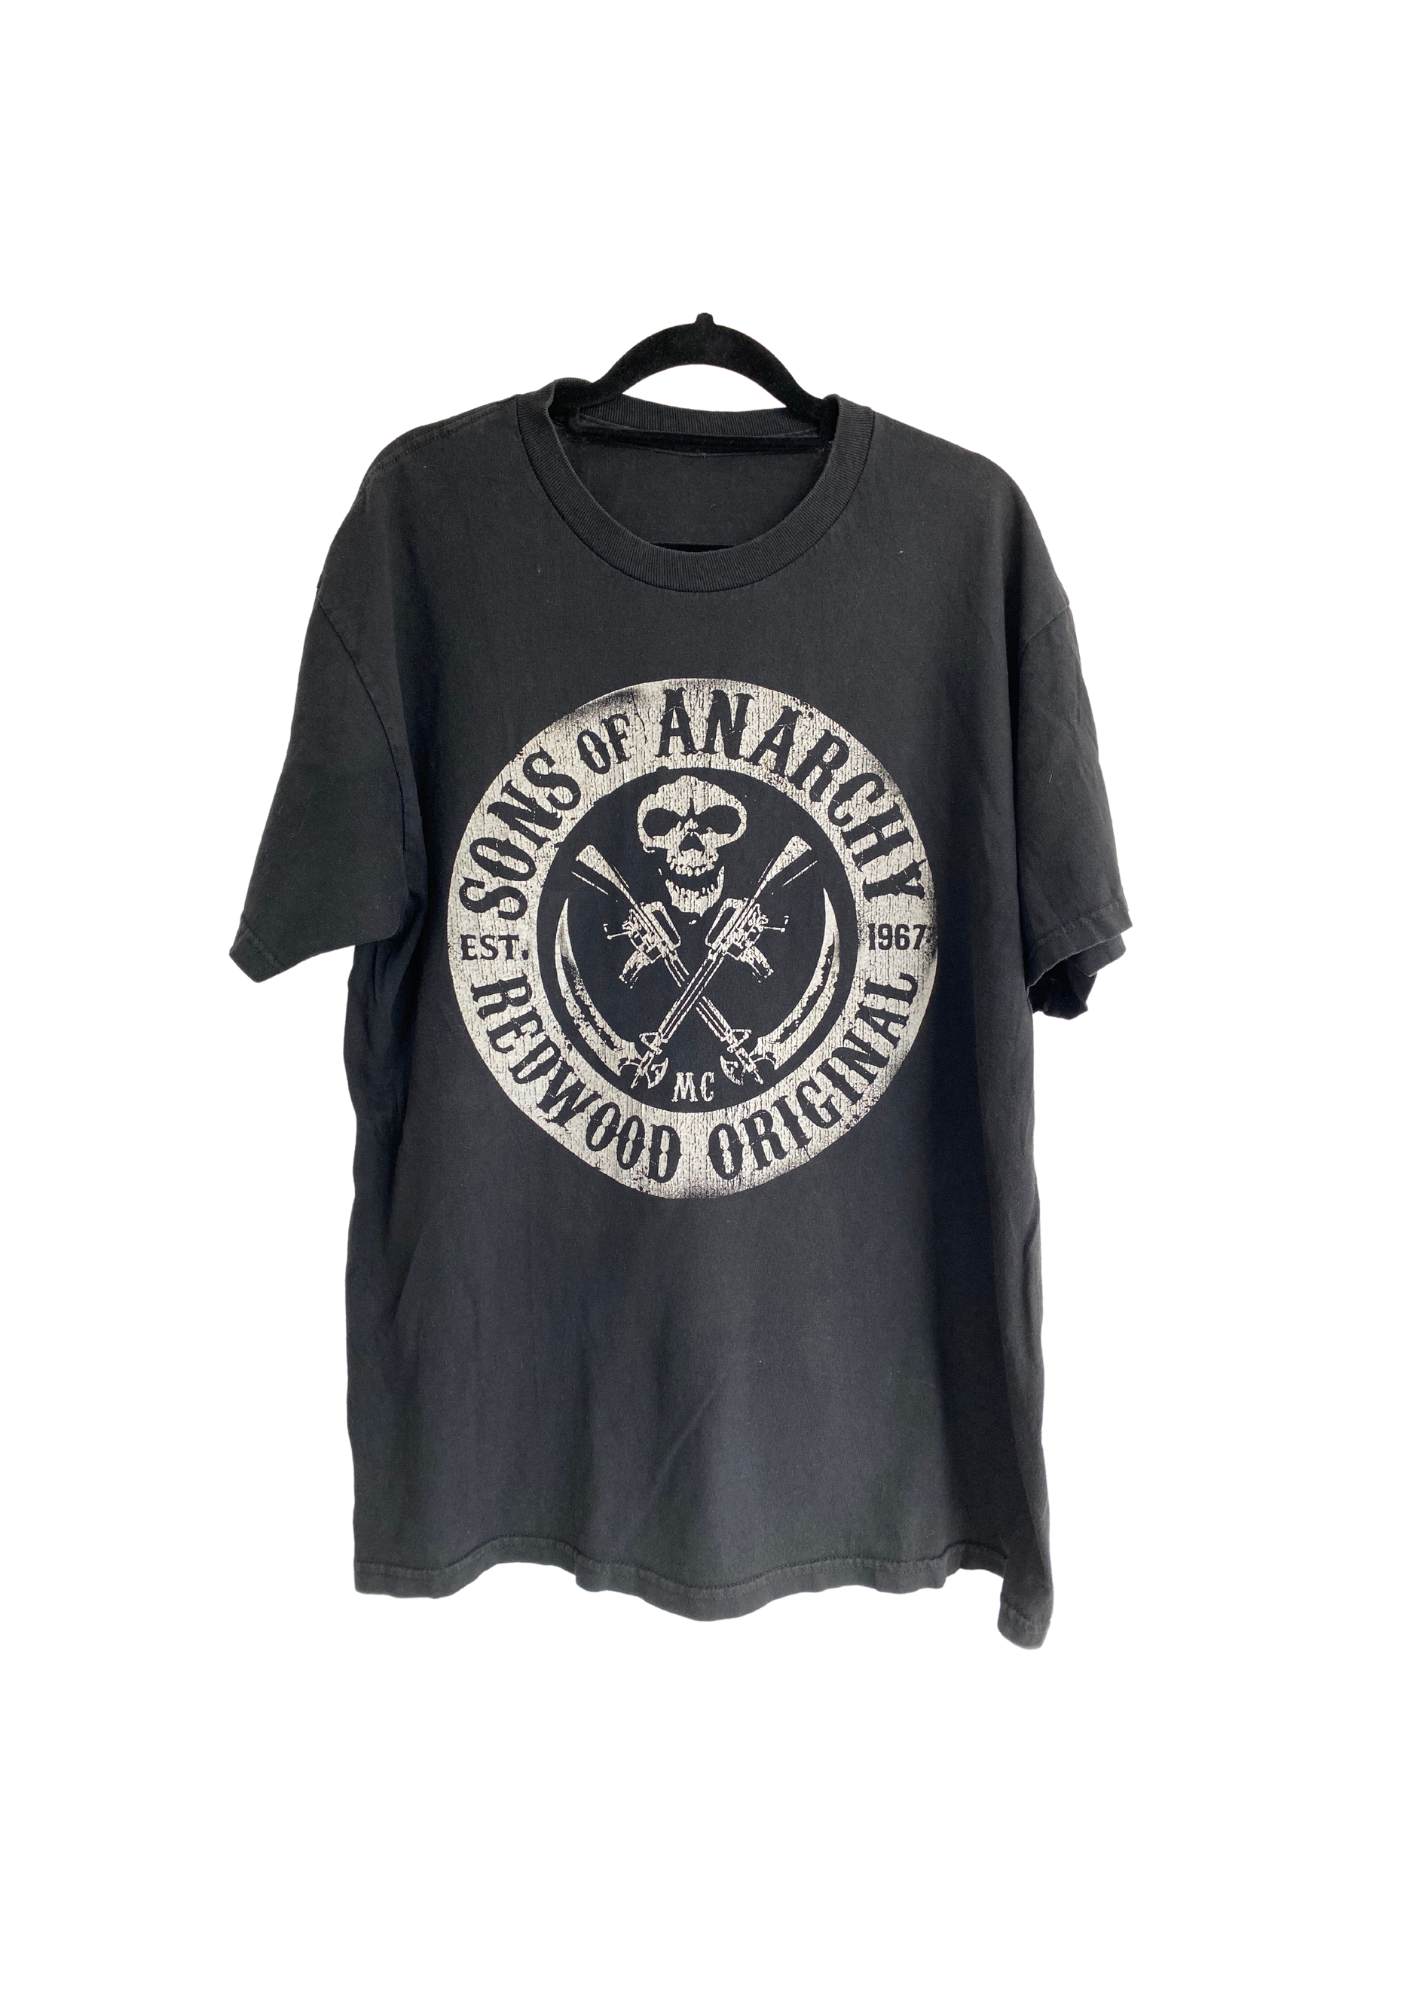 Vinatge The Sons of Anarchy T-Shirt